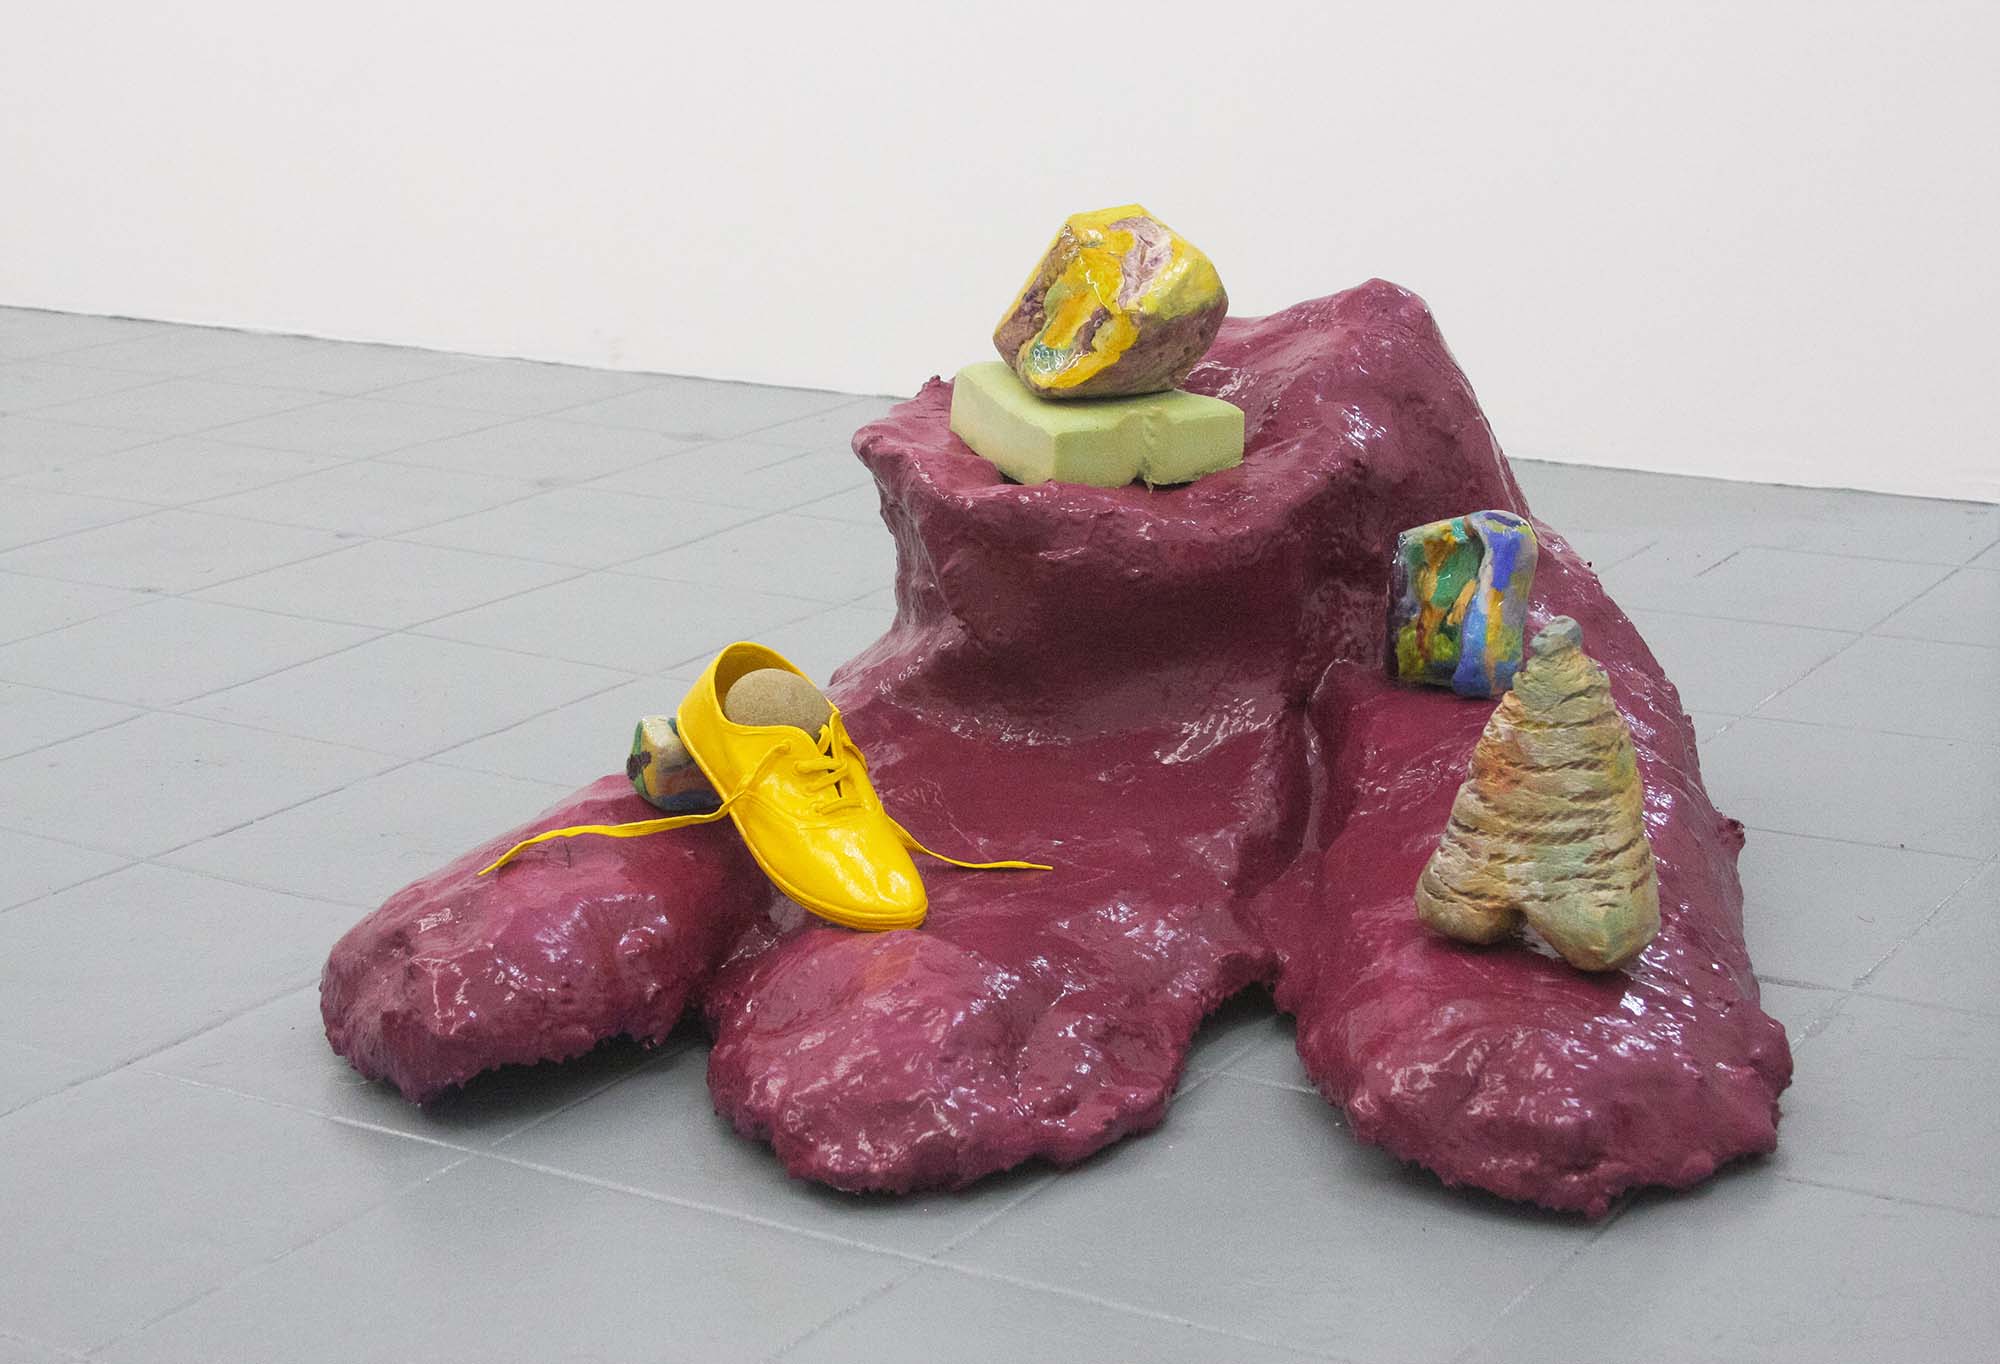 Kim Garcia, all fours, forton, enamel, acrylic latex paint, and standing stones. 2019